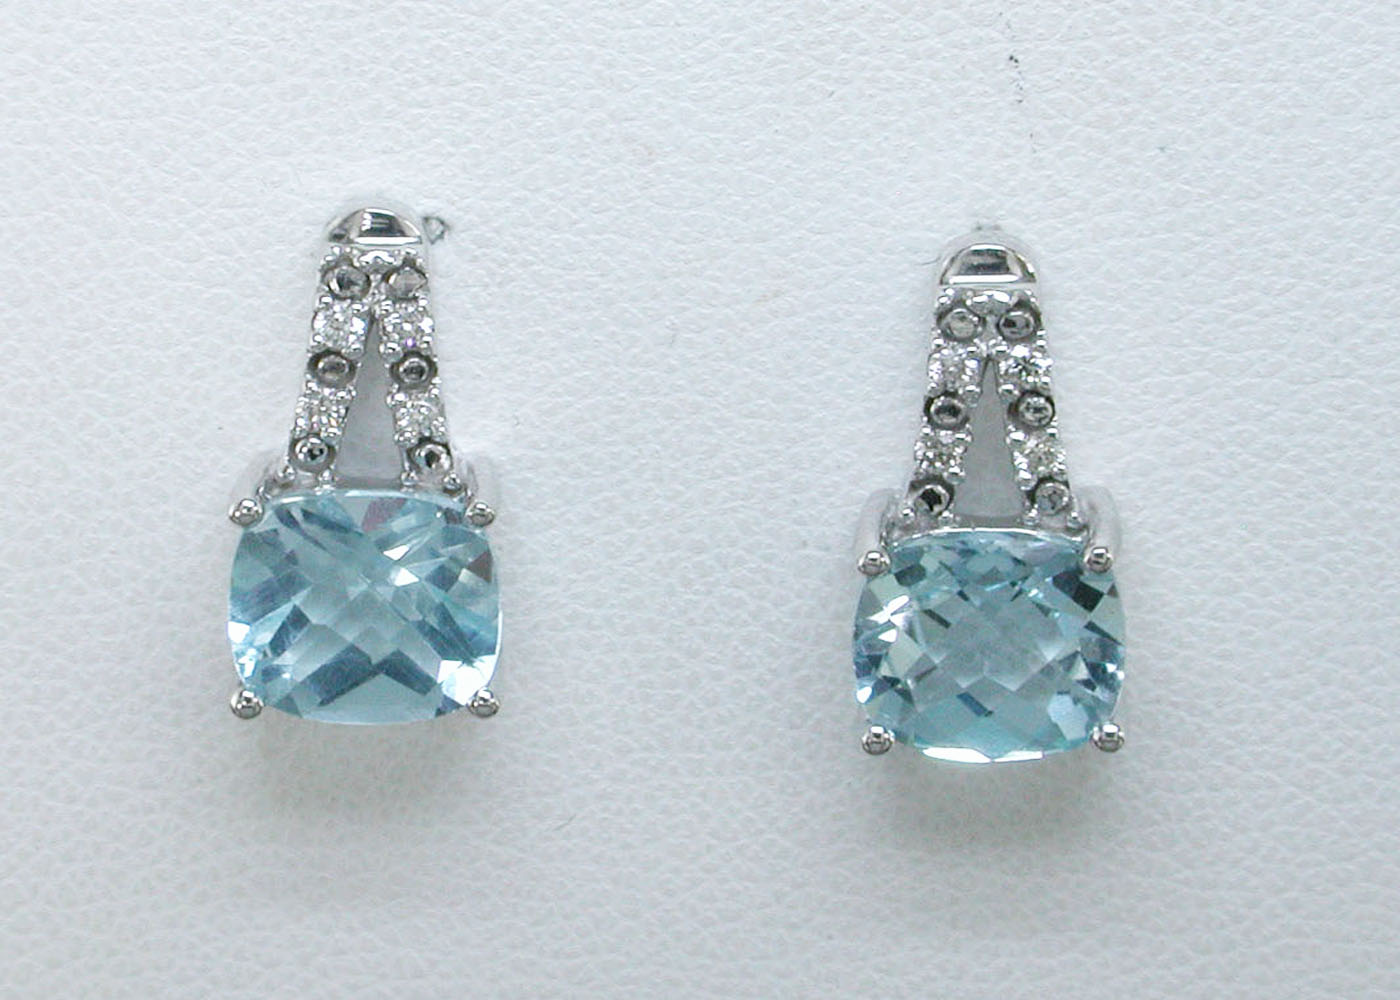 9ct White Gold Diamond And Blue Topaz Earrings - Image 6 of 8